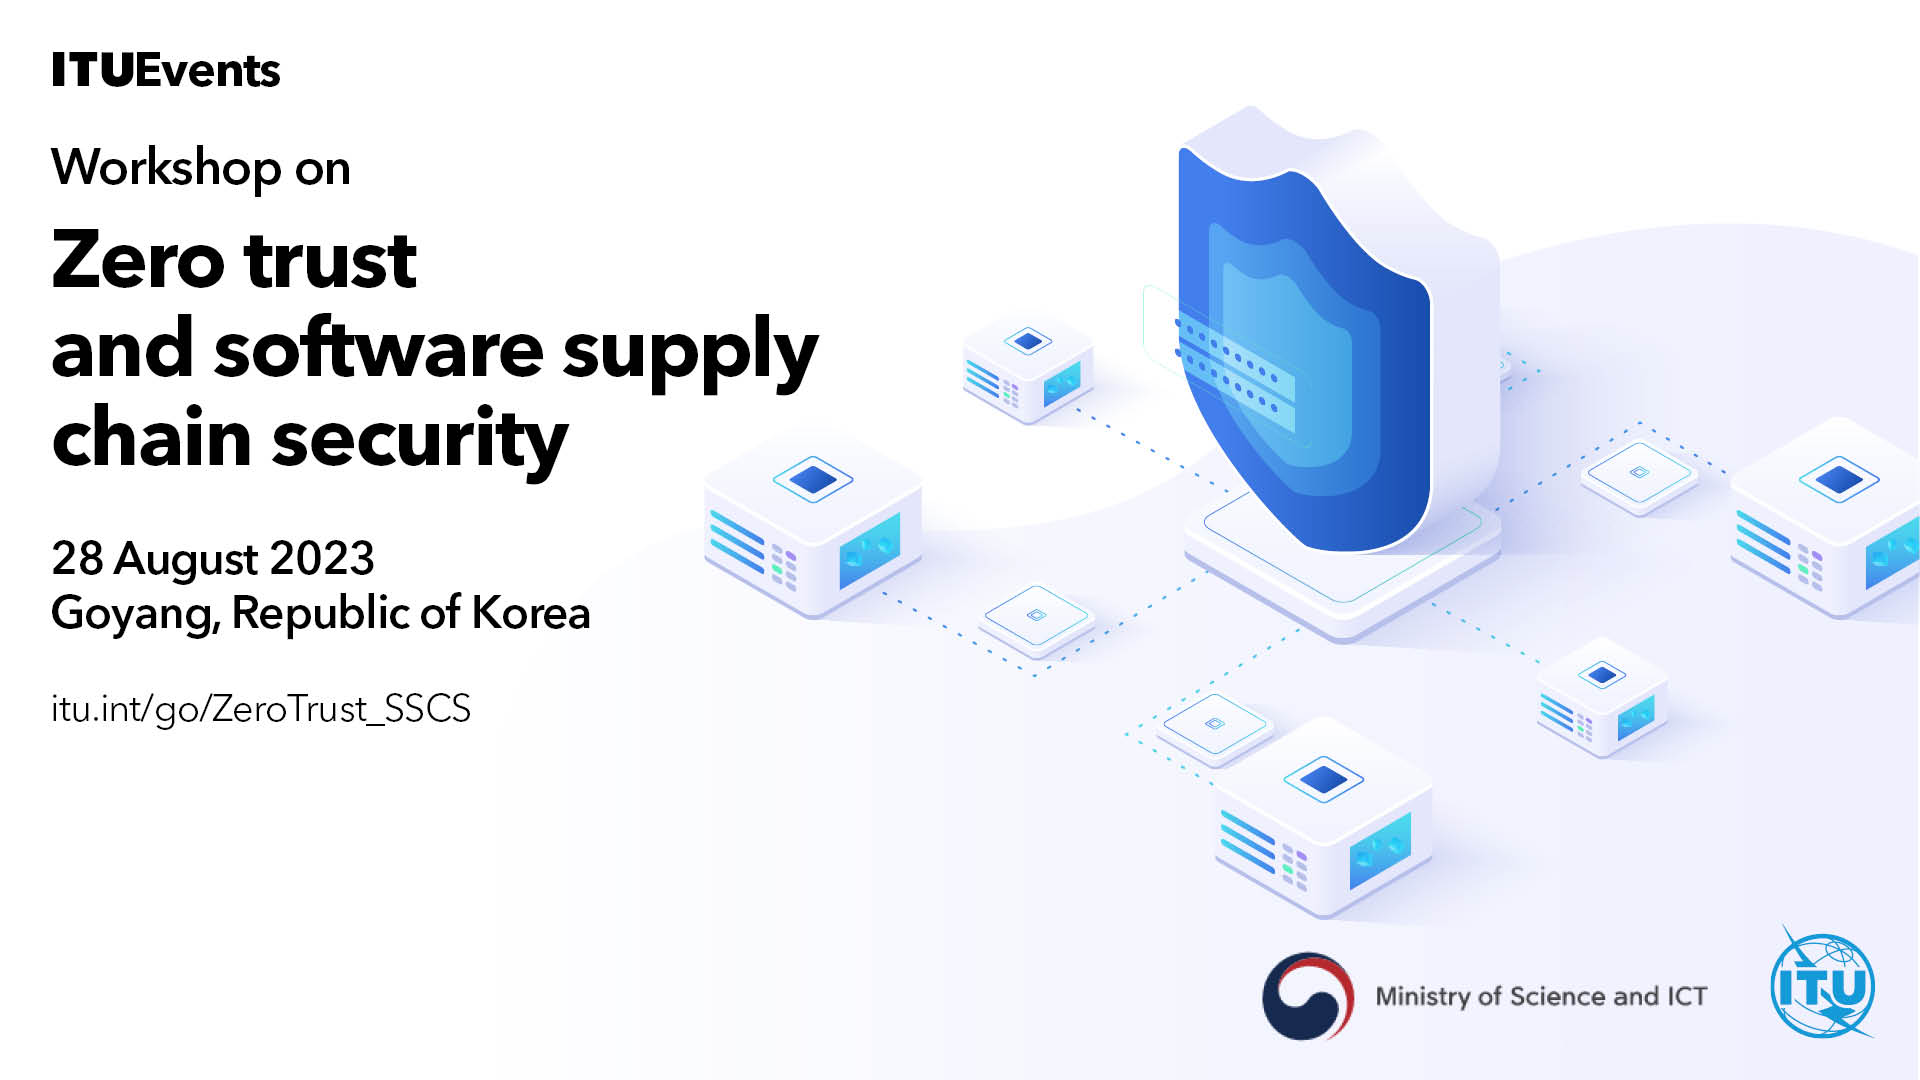 524386_Zero Trust and Software Supply Chain Security_Banner.jpg